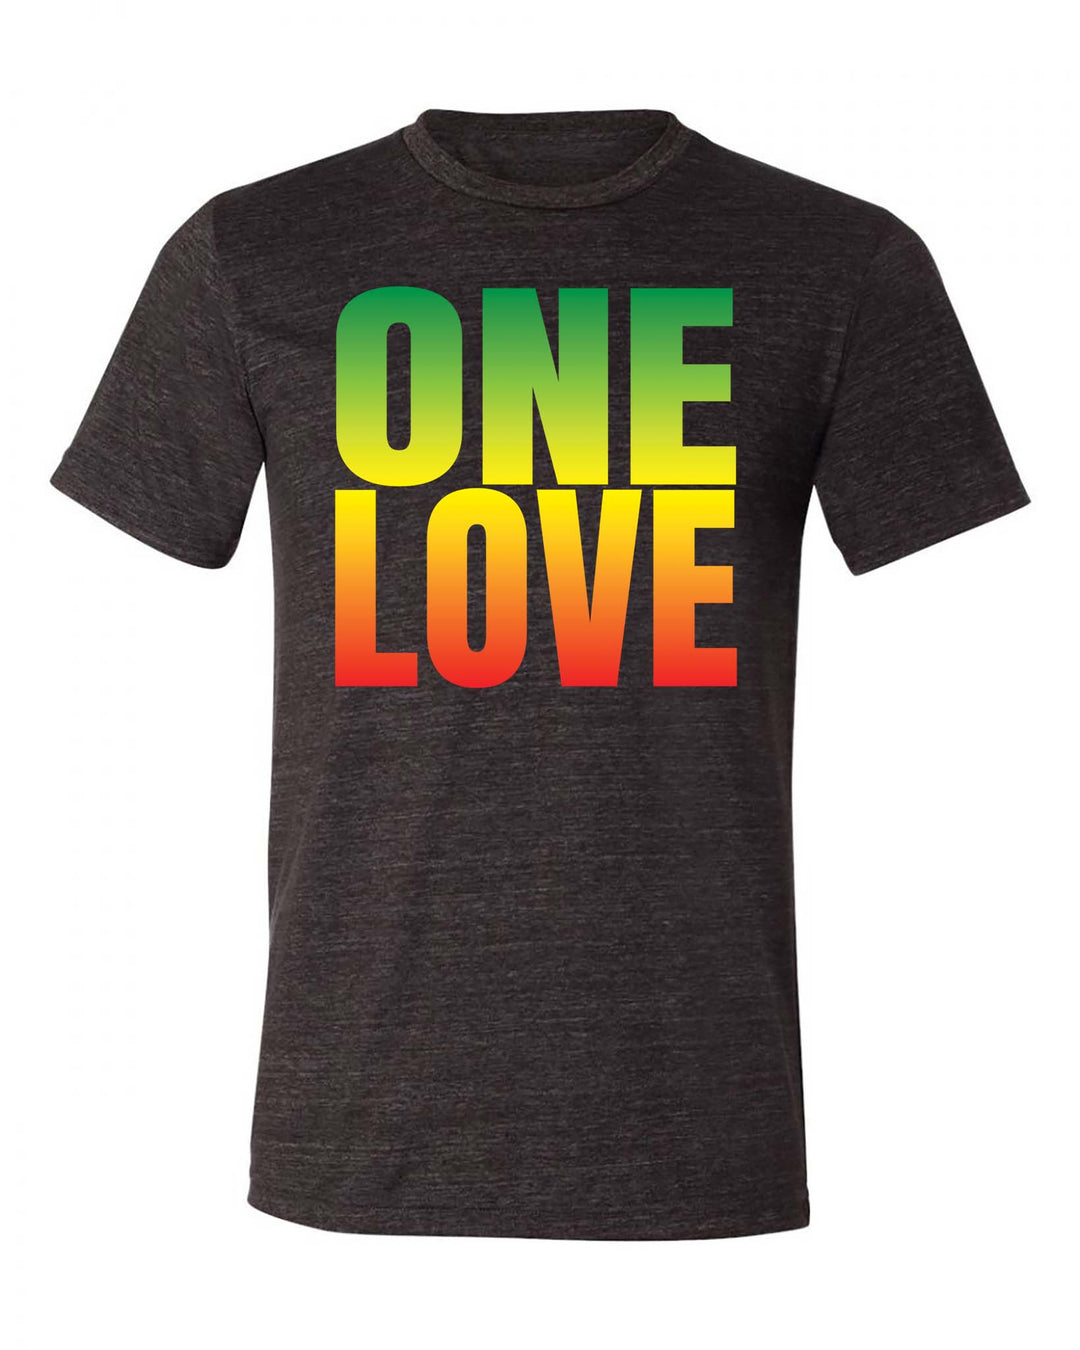 Adult "One Love" Triblend Short Sleeve Tee